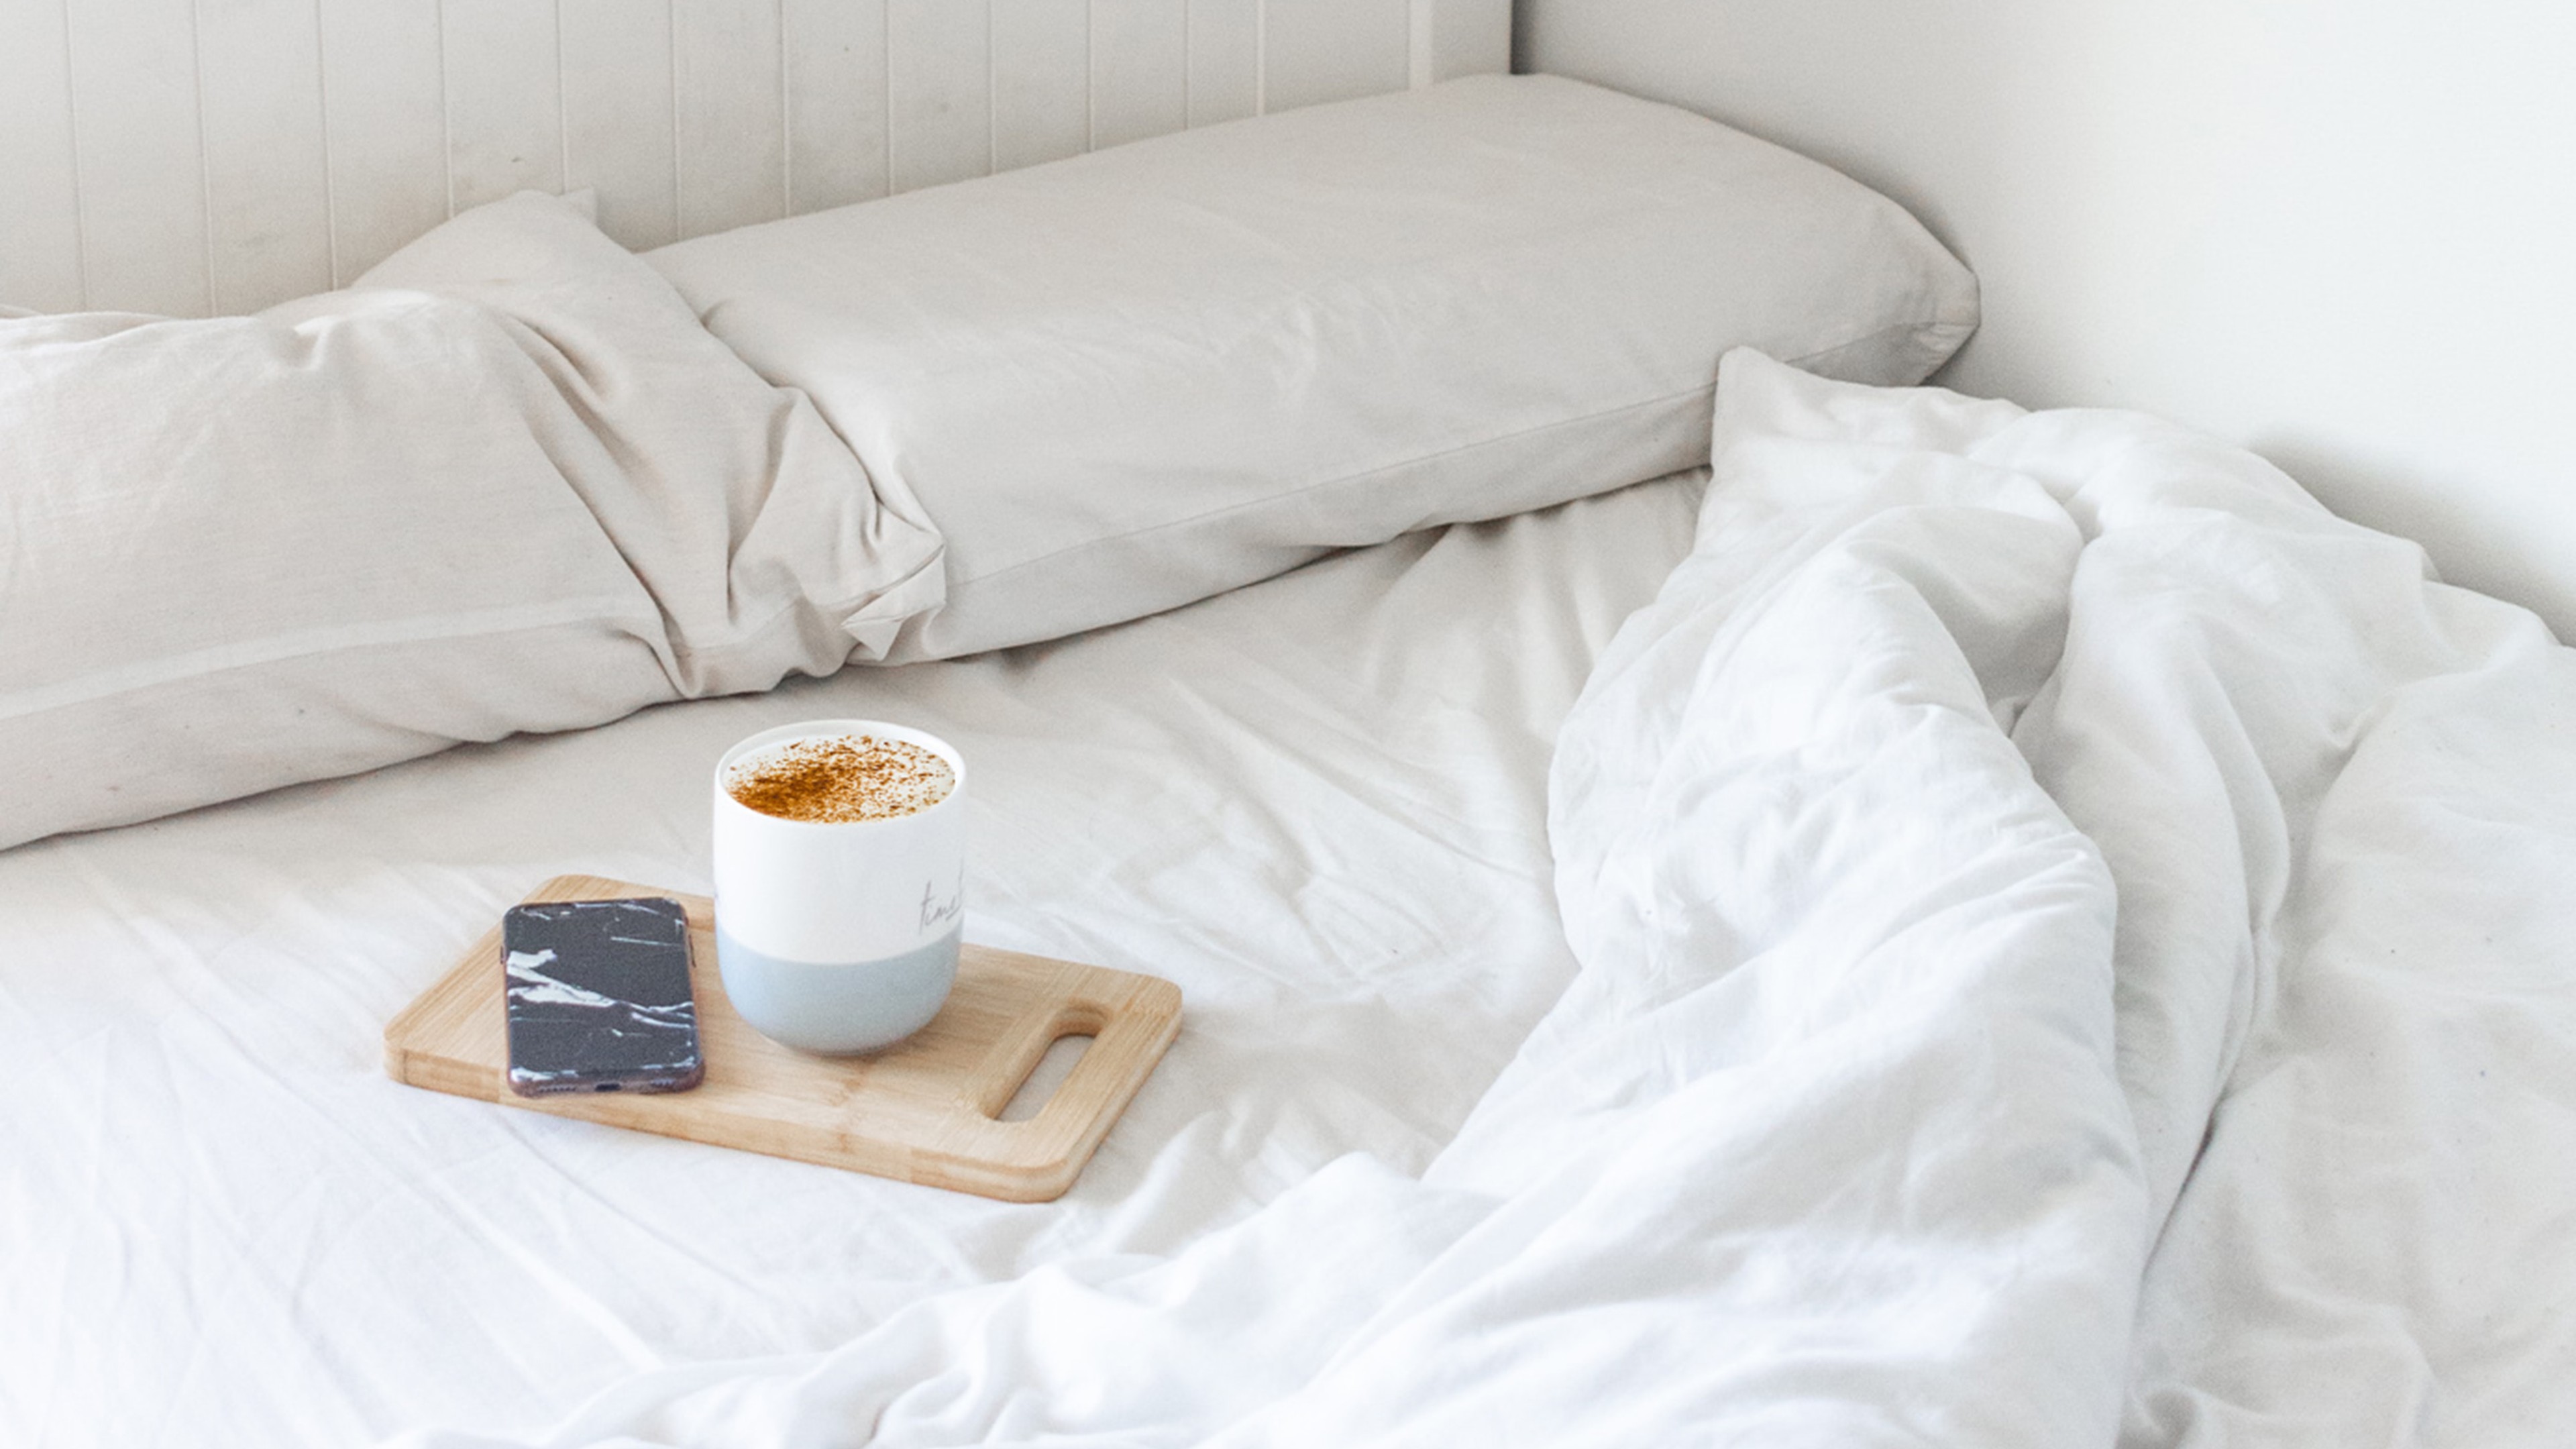 coffee and phone laying on the bed